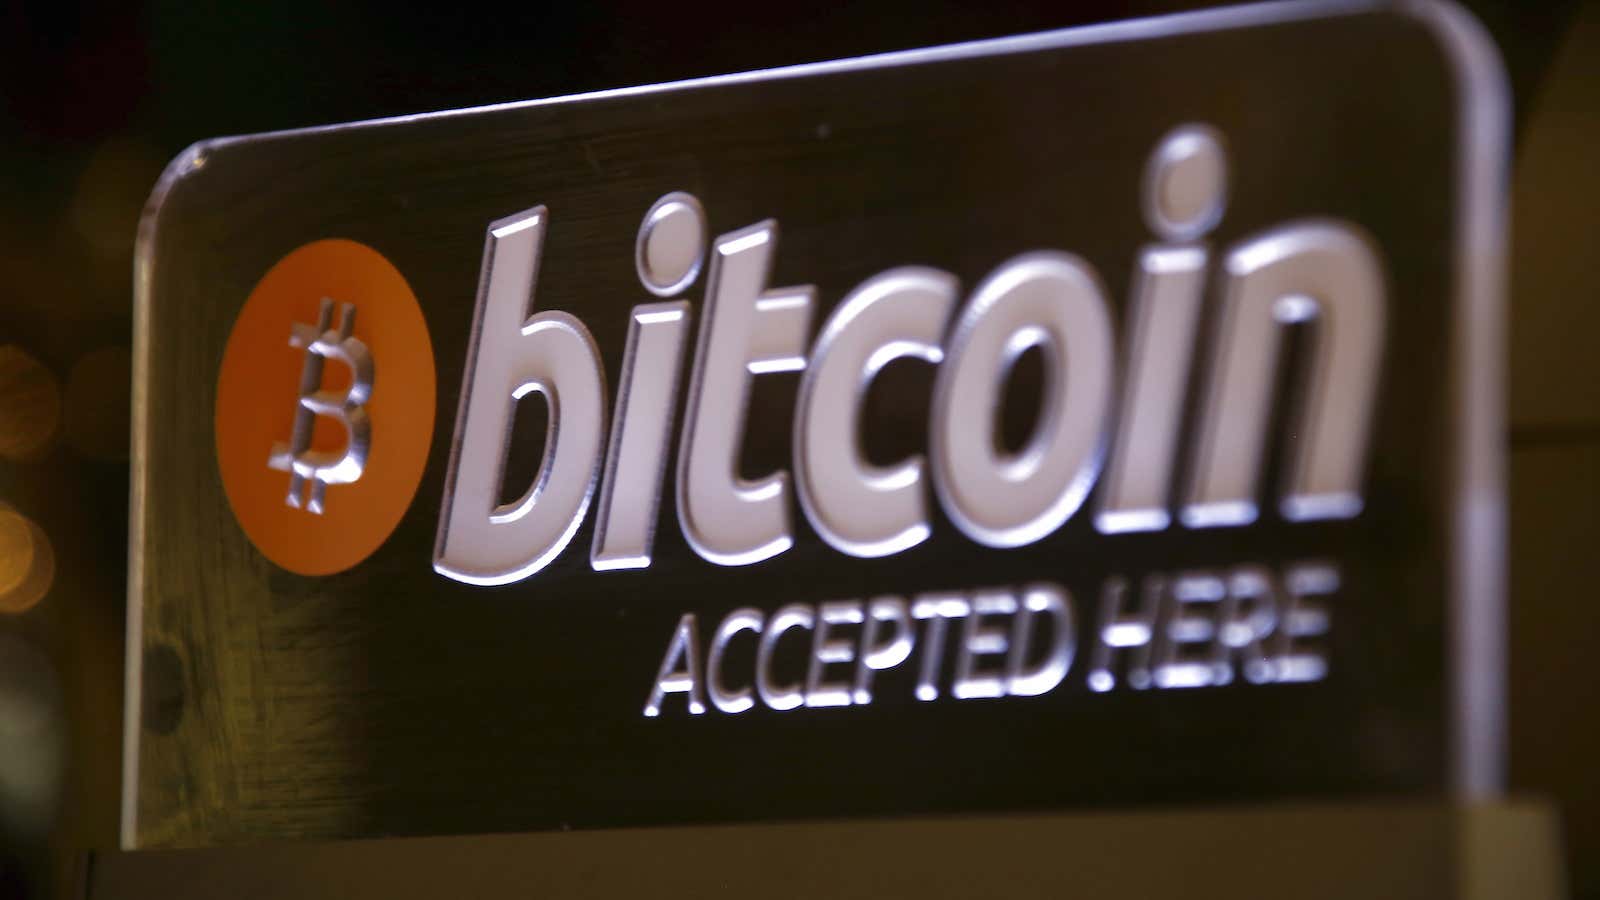 Bitcoin has become more visible, but its founder remains a mystery.